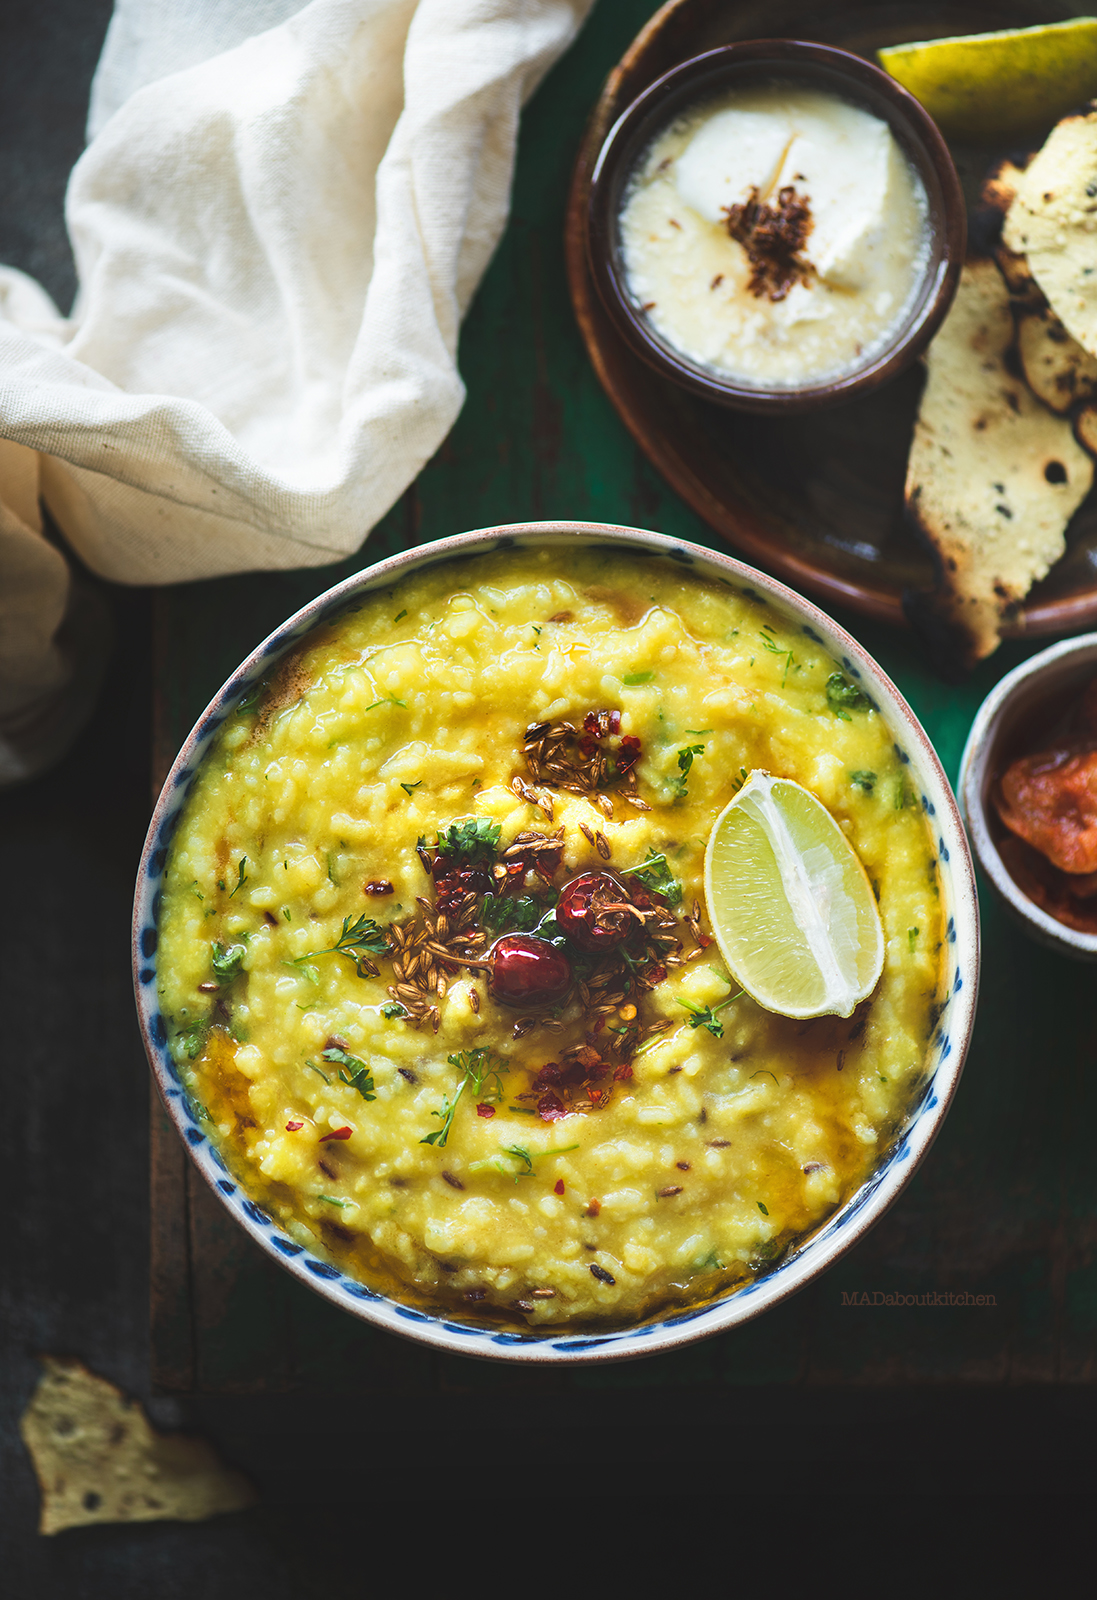 Khichdi, the most common one pot meal in India is a wholesome dish made using rice and lentils. Khichdi is the comfort food that is easy and healthy.